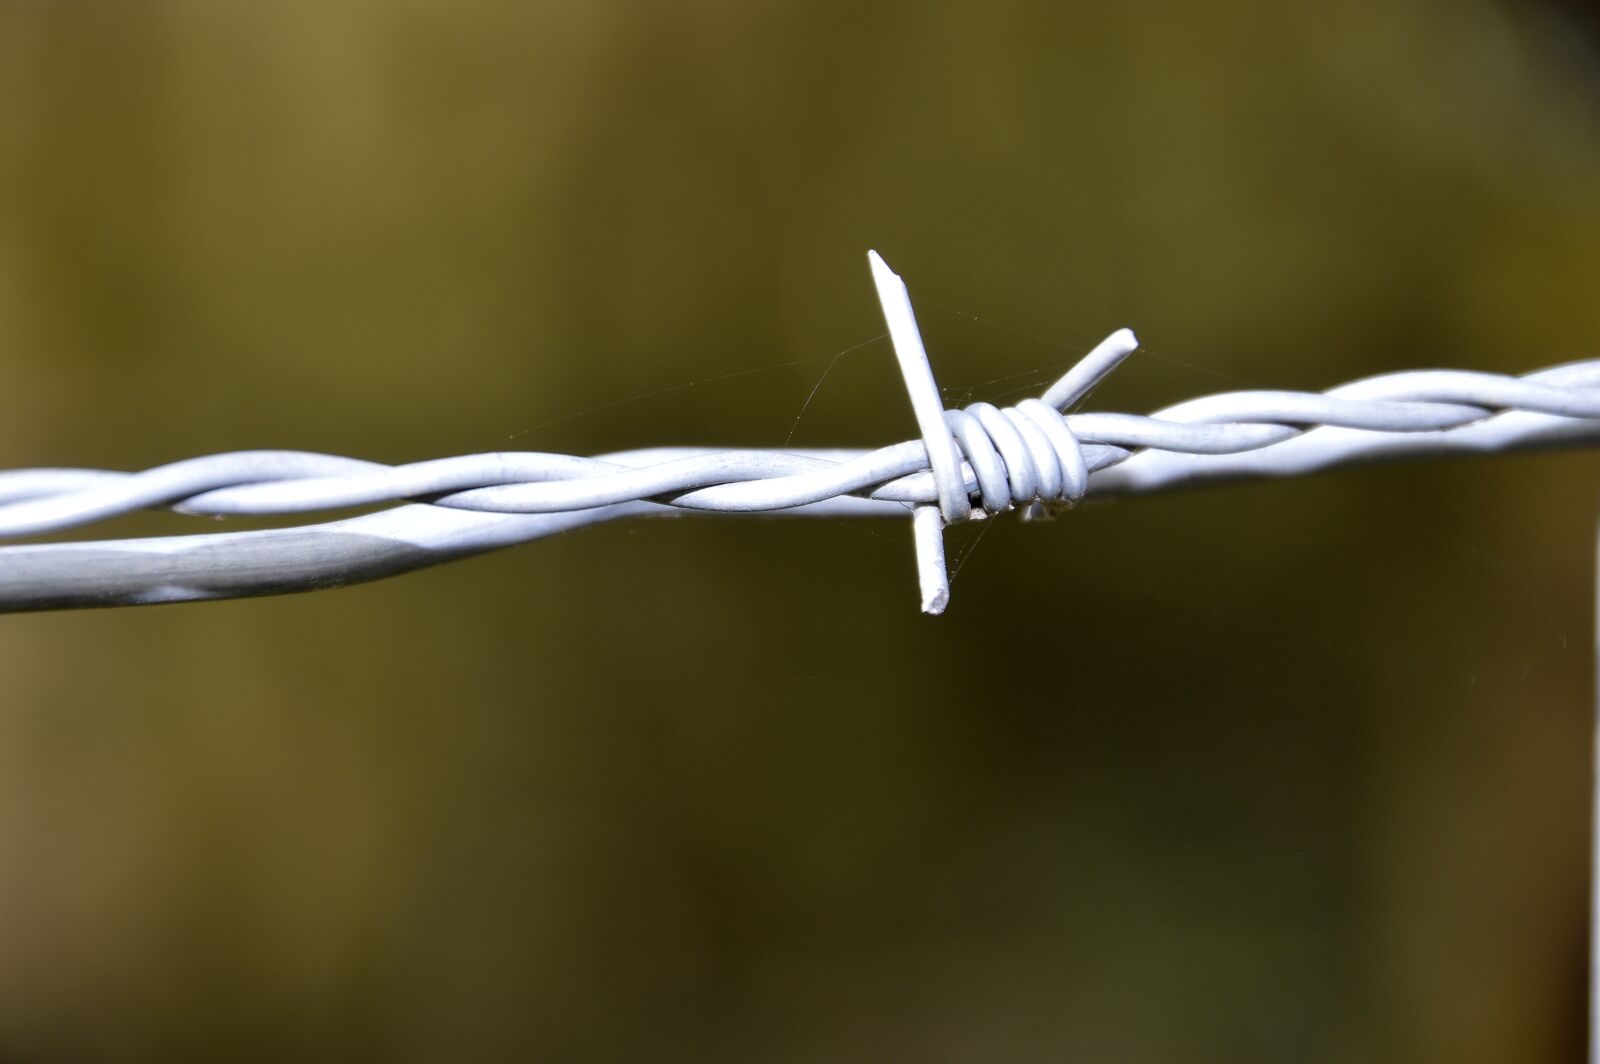 Nikon D3200 sample photo. Barbed wire, security, wire photography